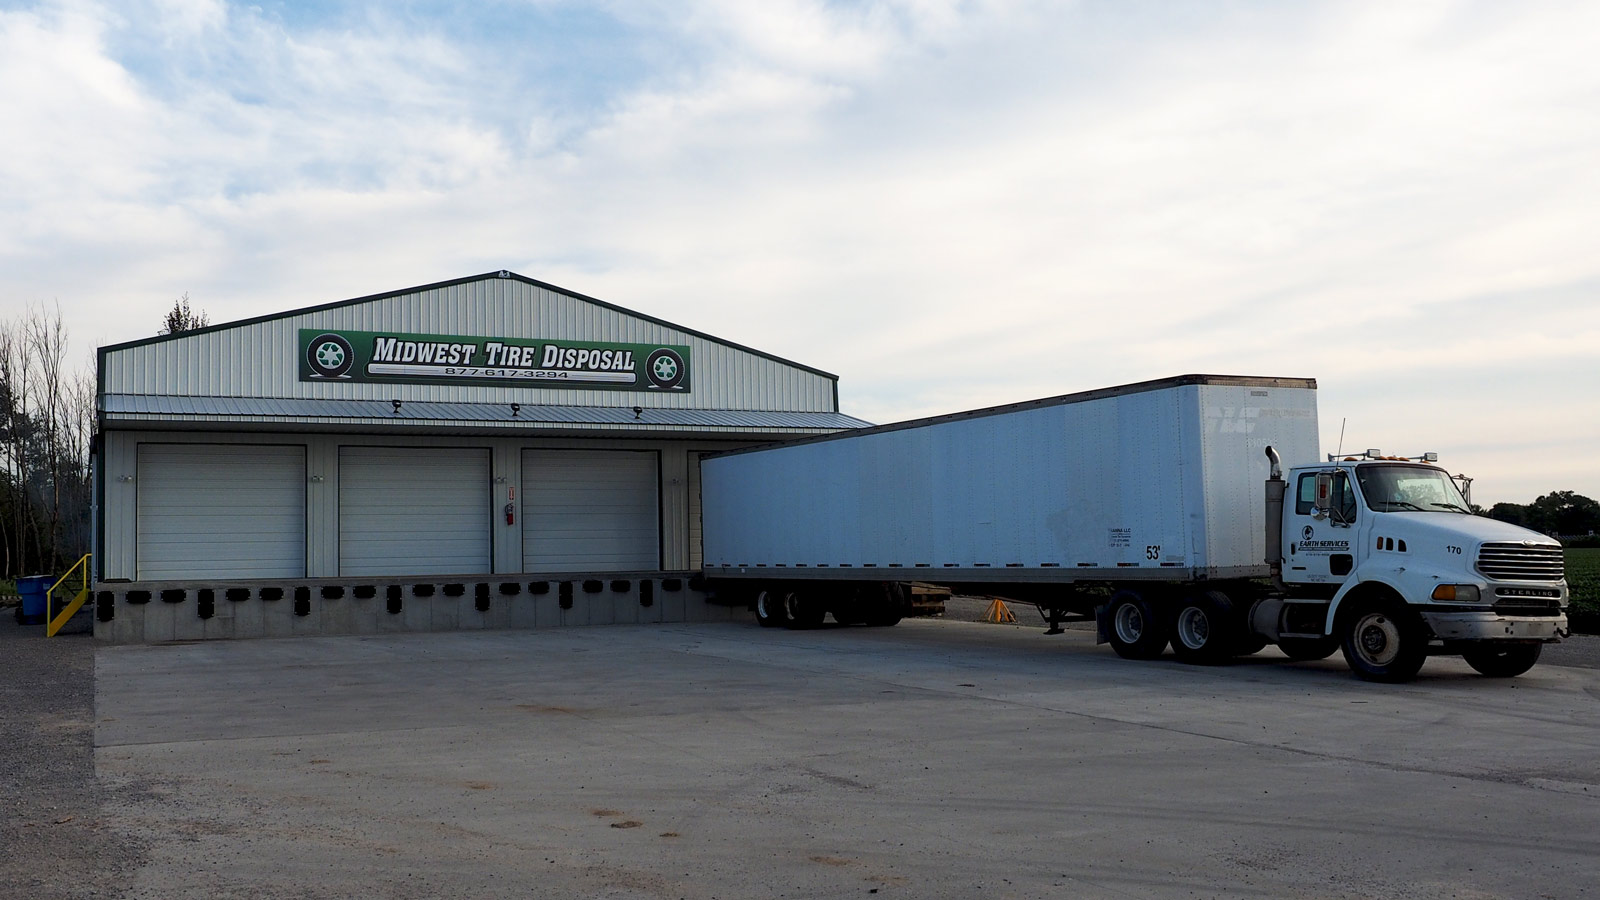 Waste Tire Removal & Recycling - Midwest Tire Disposal